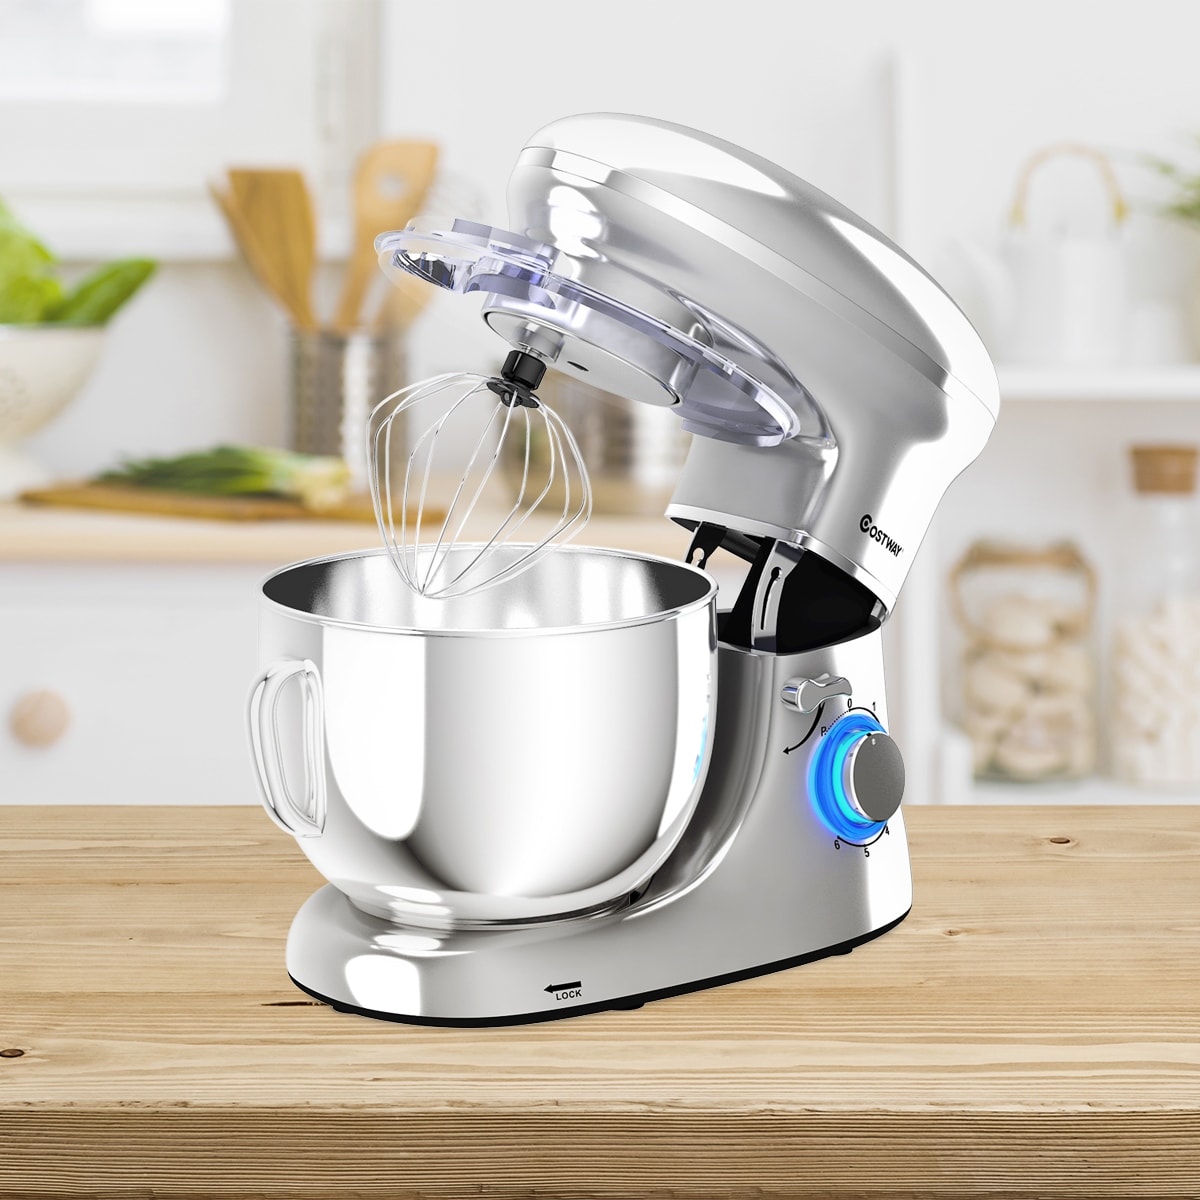 9.5 Qt Stand Mixer, 10-Speed Tilt-Head Food Mixer, 660W Kitchen Electric  Mixer with Stainless Steel Bowl, Dishwasher-Safe